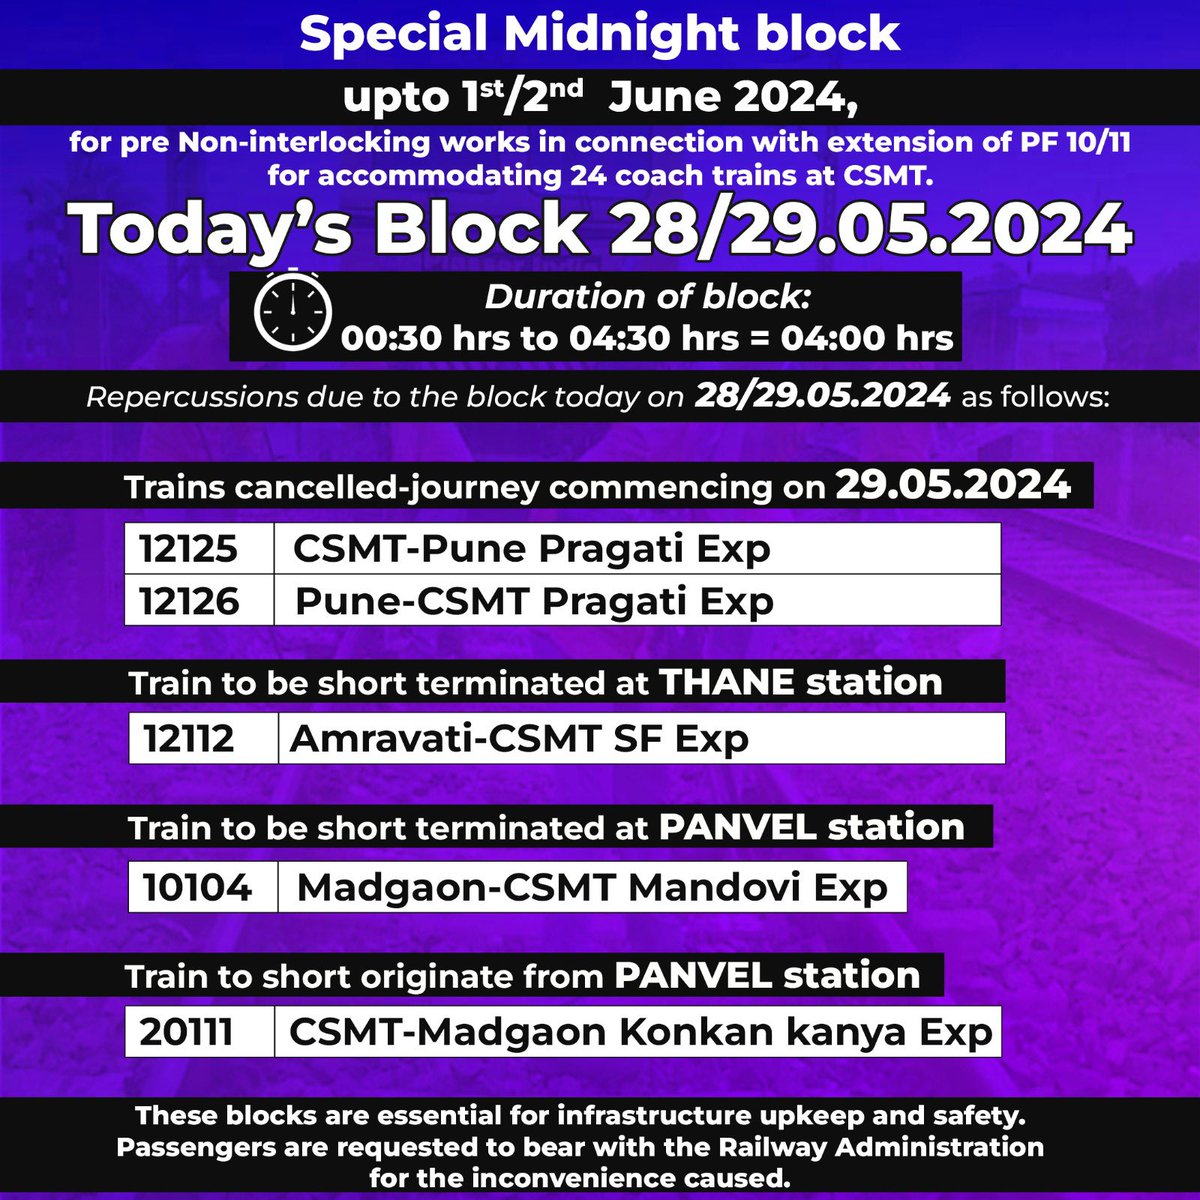 Special Block Alert! 🚧 Special midnight block up to 01/02.06.2024 for Pre Non-Interlocking works. Block repercussions today on 28/29.05.2024.👈 Suburban train services will not be available between Byculla and CSMT from 00.30 hrs to 04.30 hrs (midnight of 28/29.05.2024).